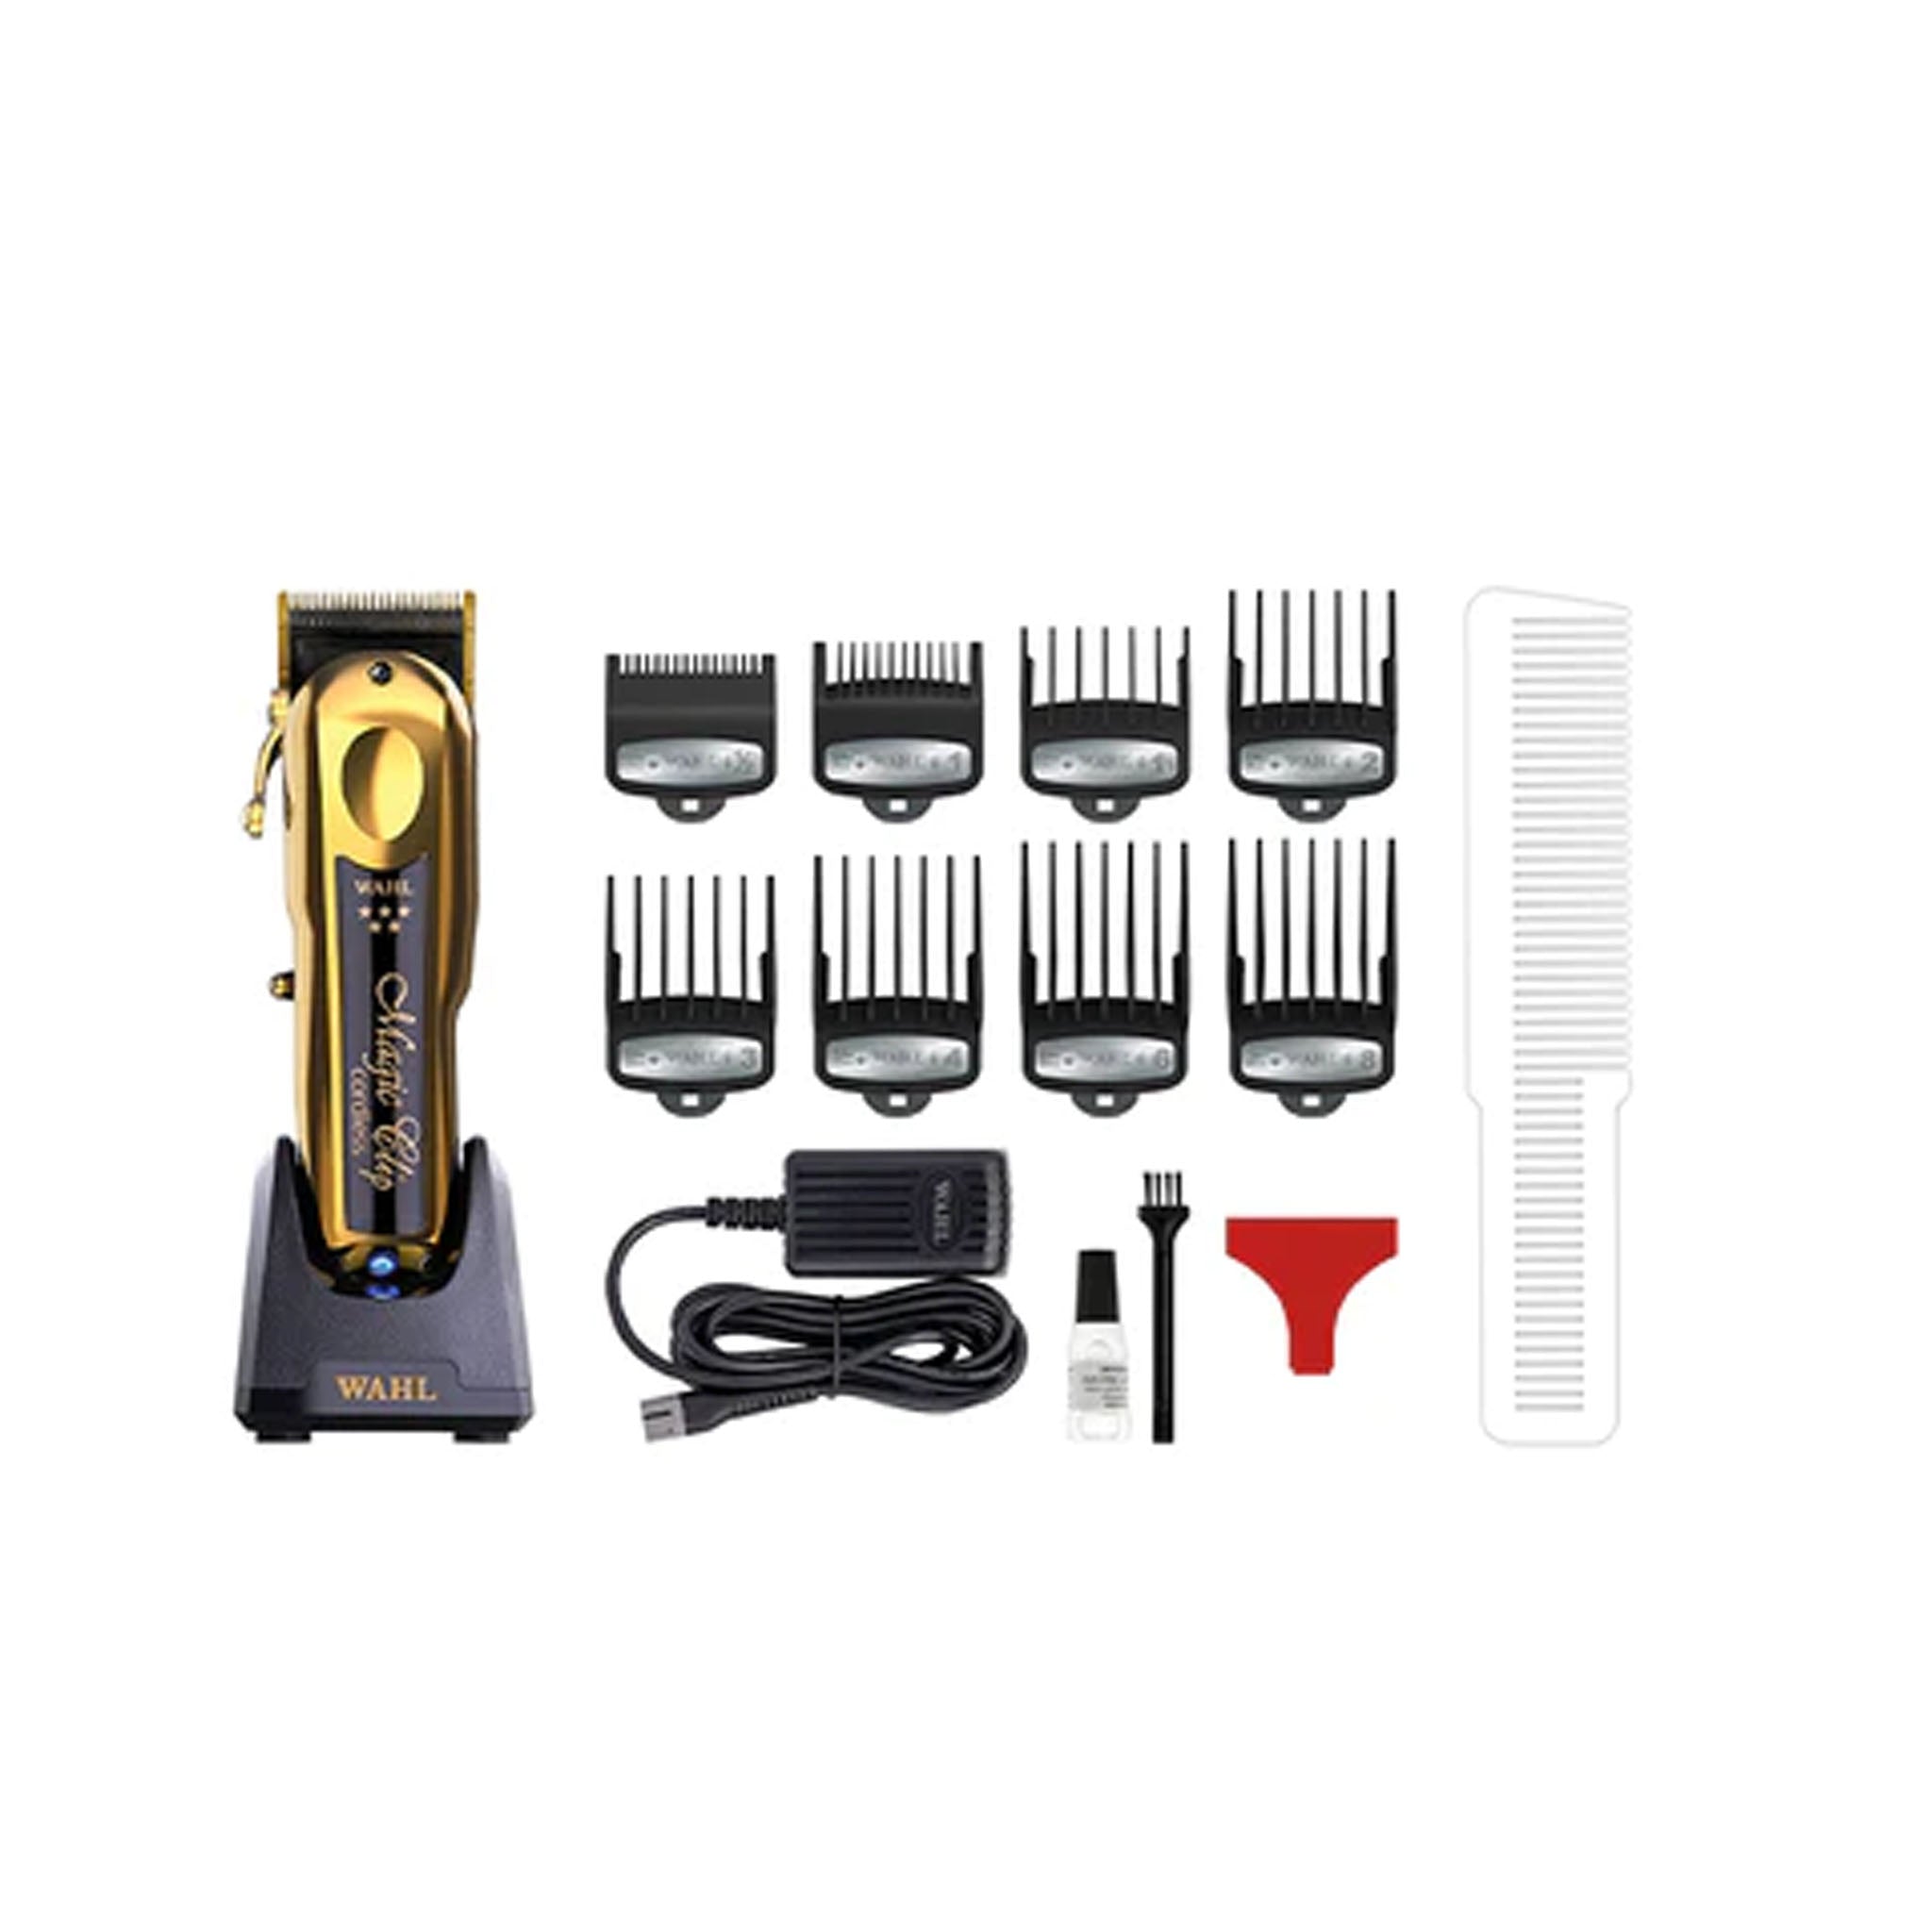 Wahl Professional 5-Star Limited Edition Black & Gold Cordless